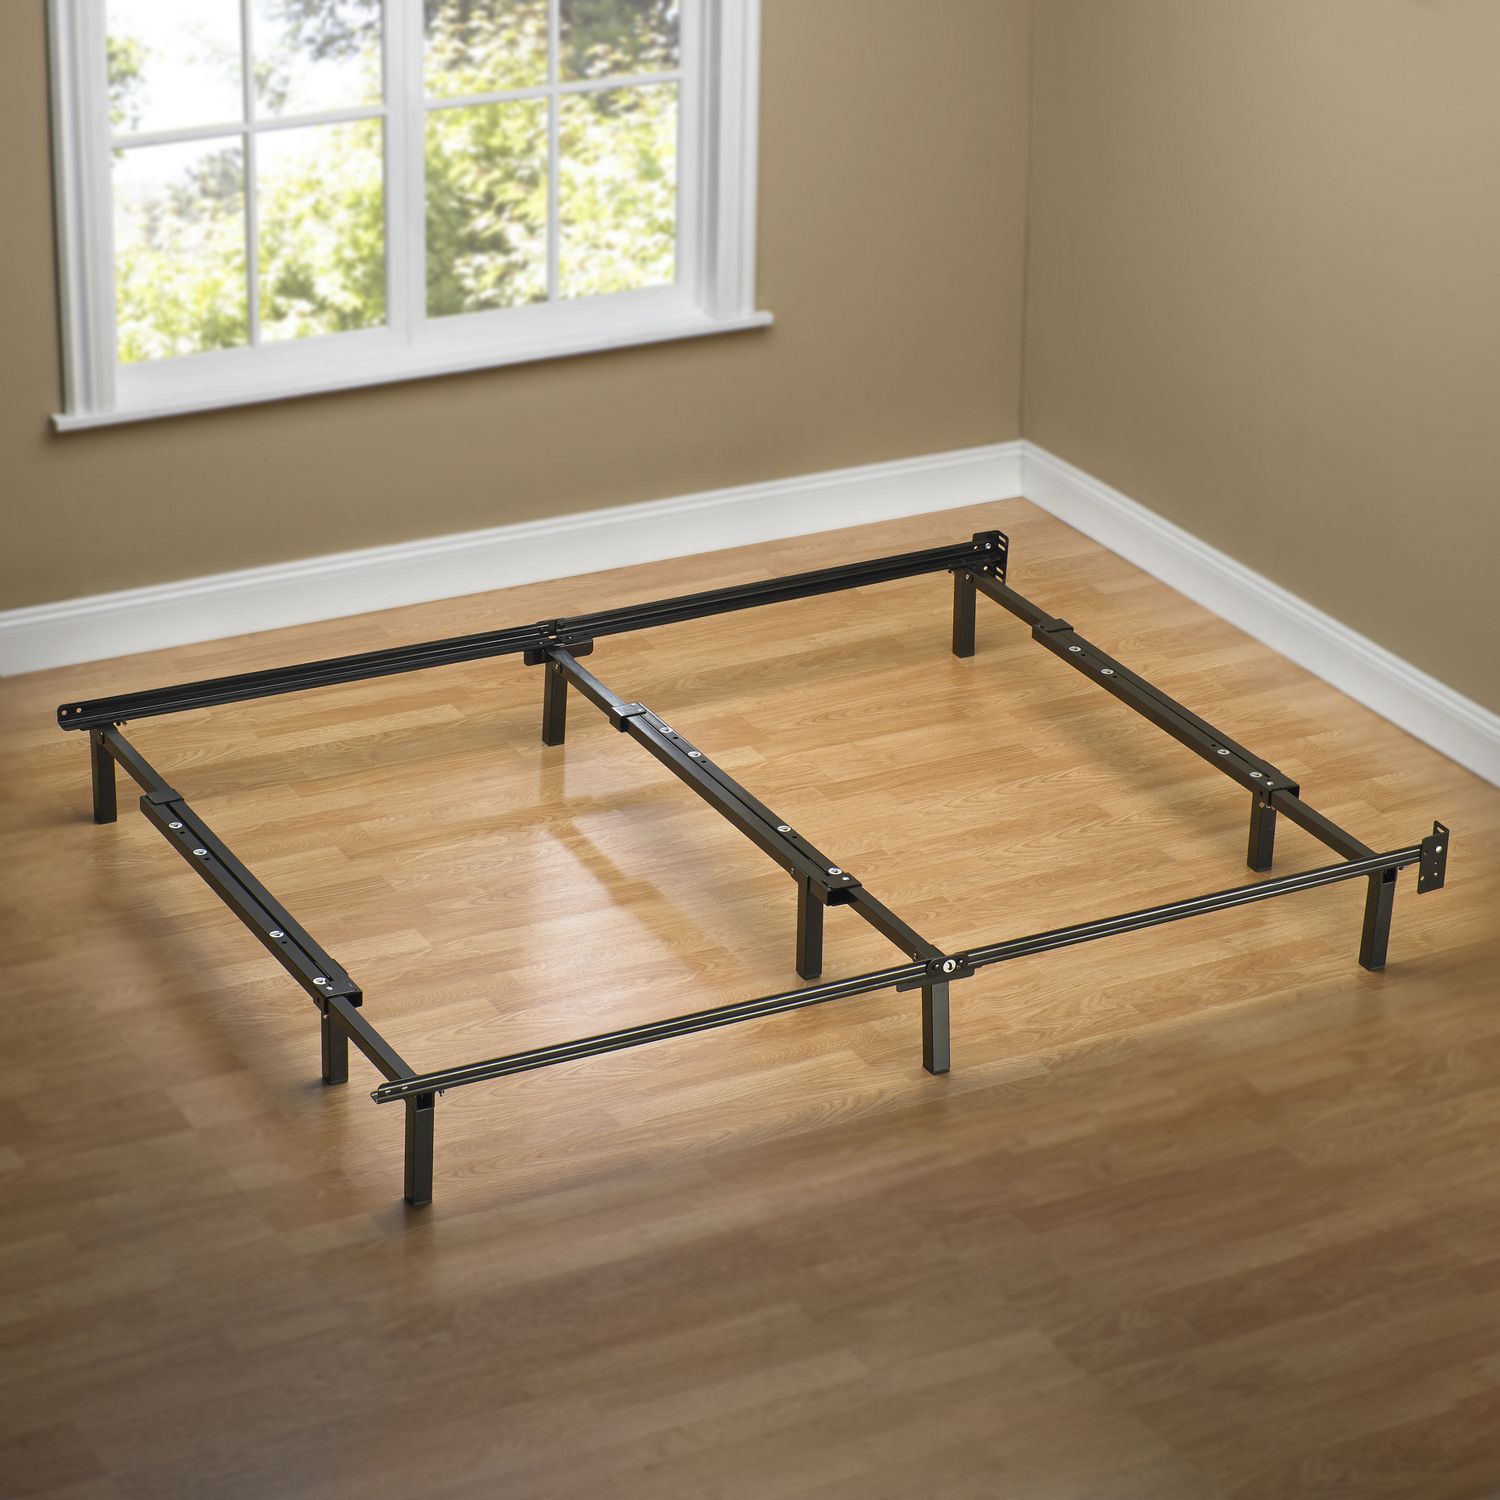 Sleep Revolution Compack Metal, Full Bed Frame With Box Spring And Mattress